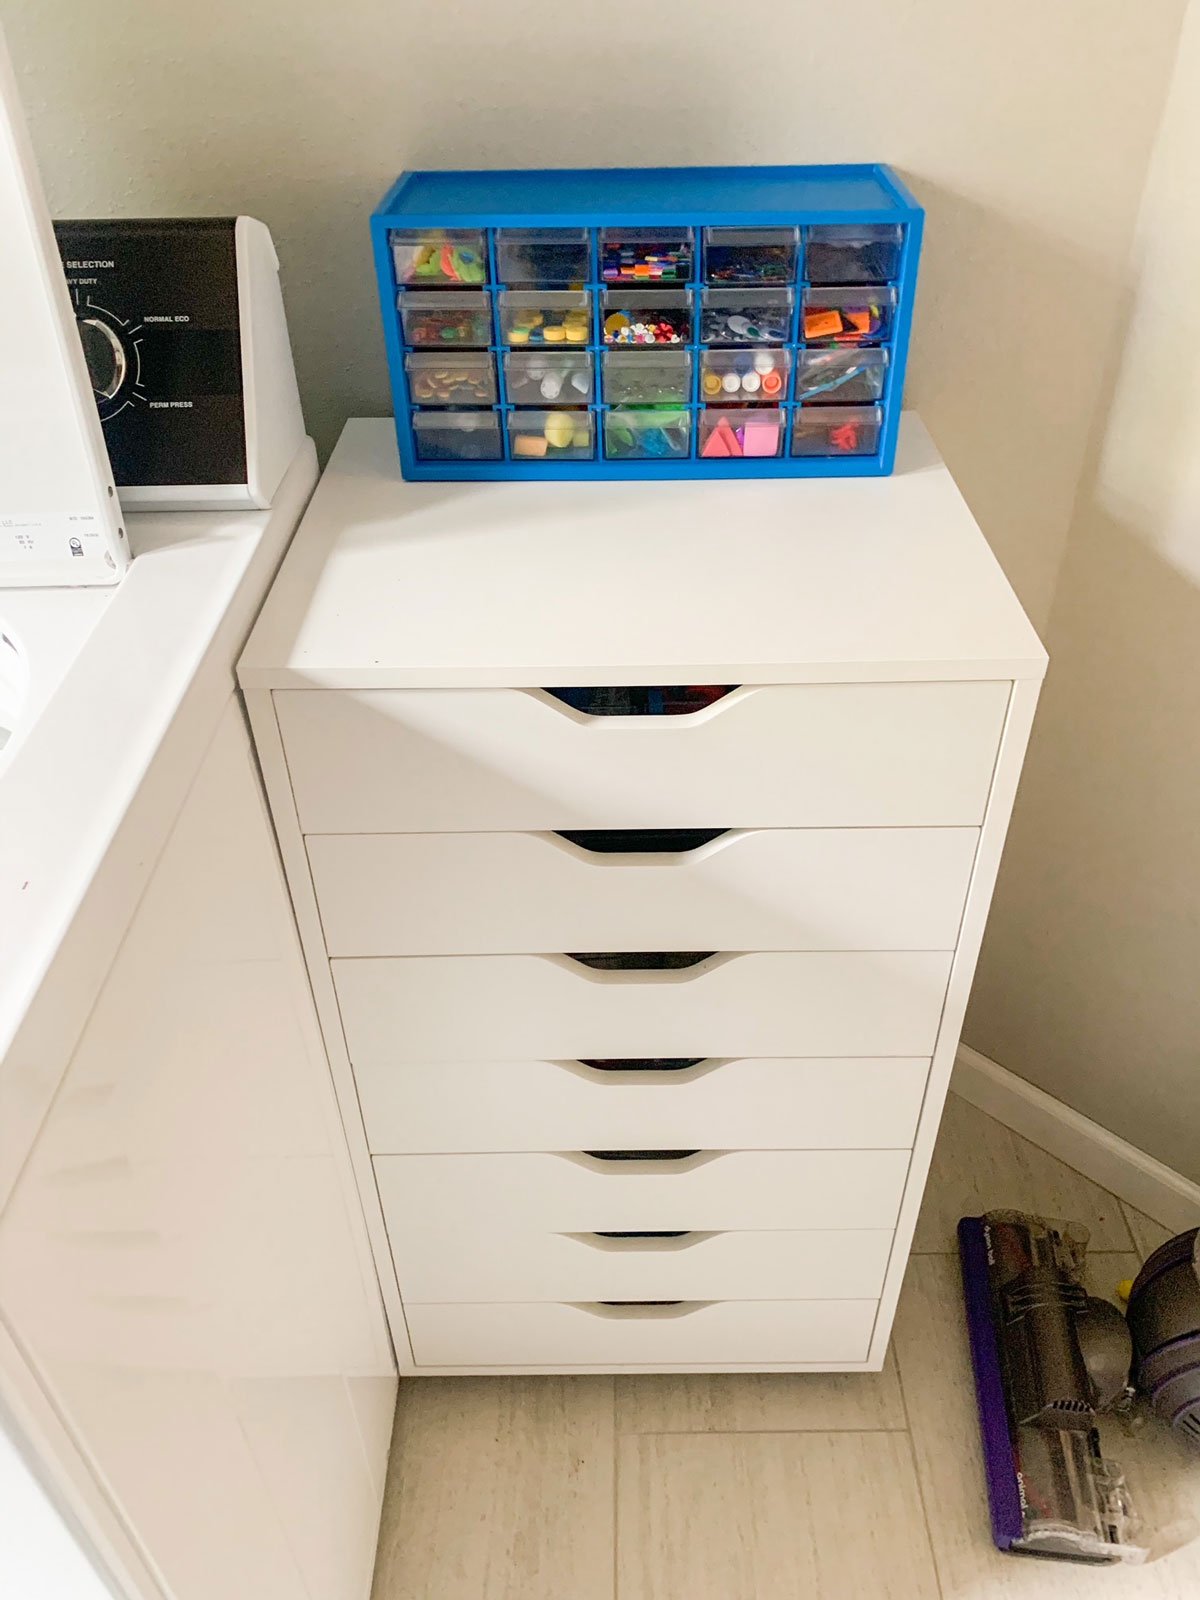 A white chest of drawers in a laundry room. On top is a blue set of drawers with craft supplies.